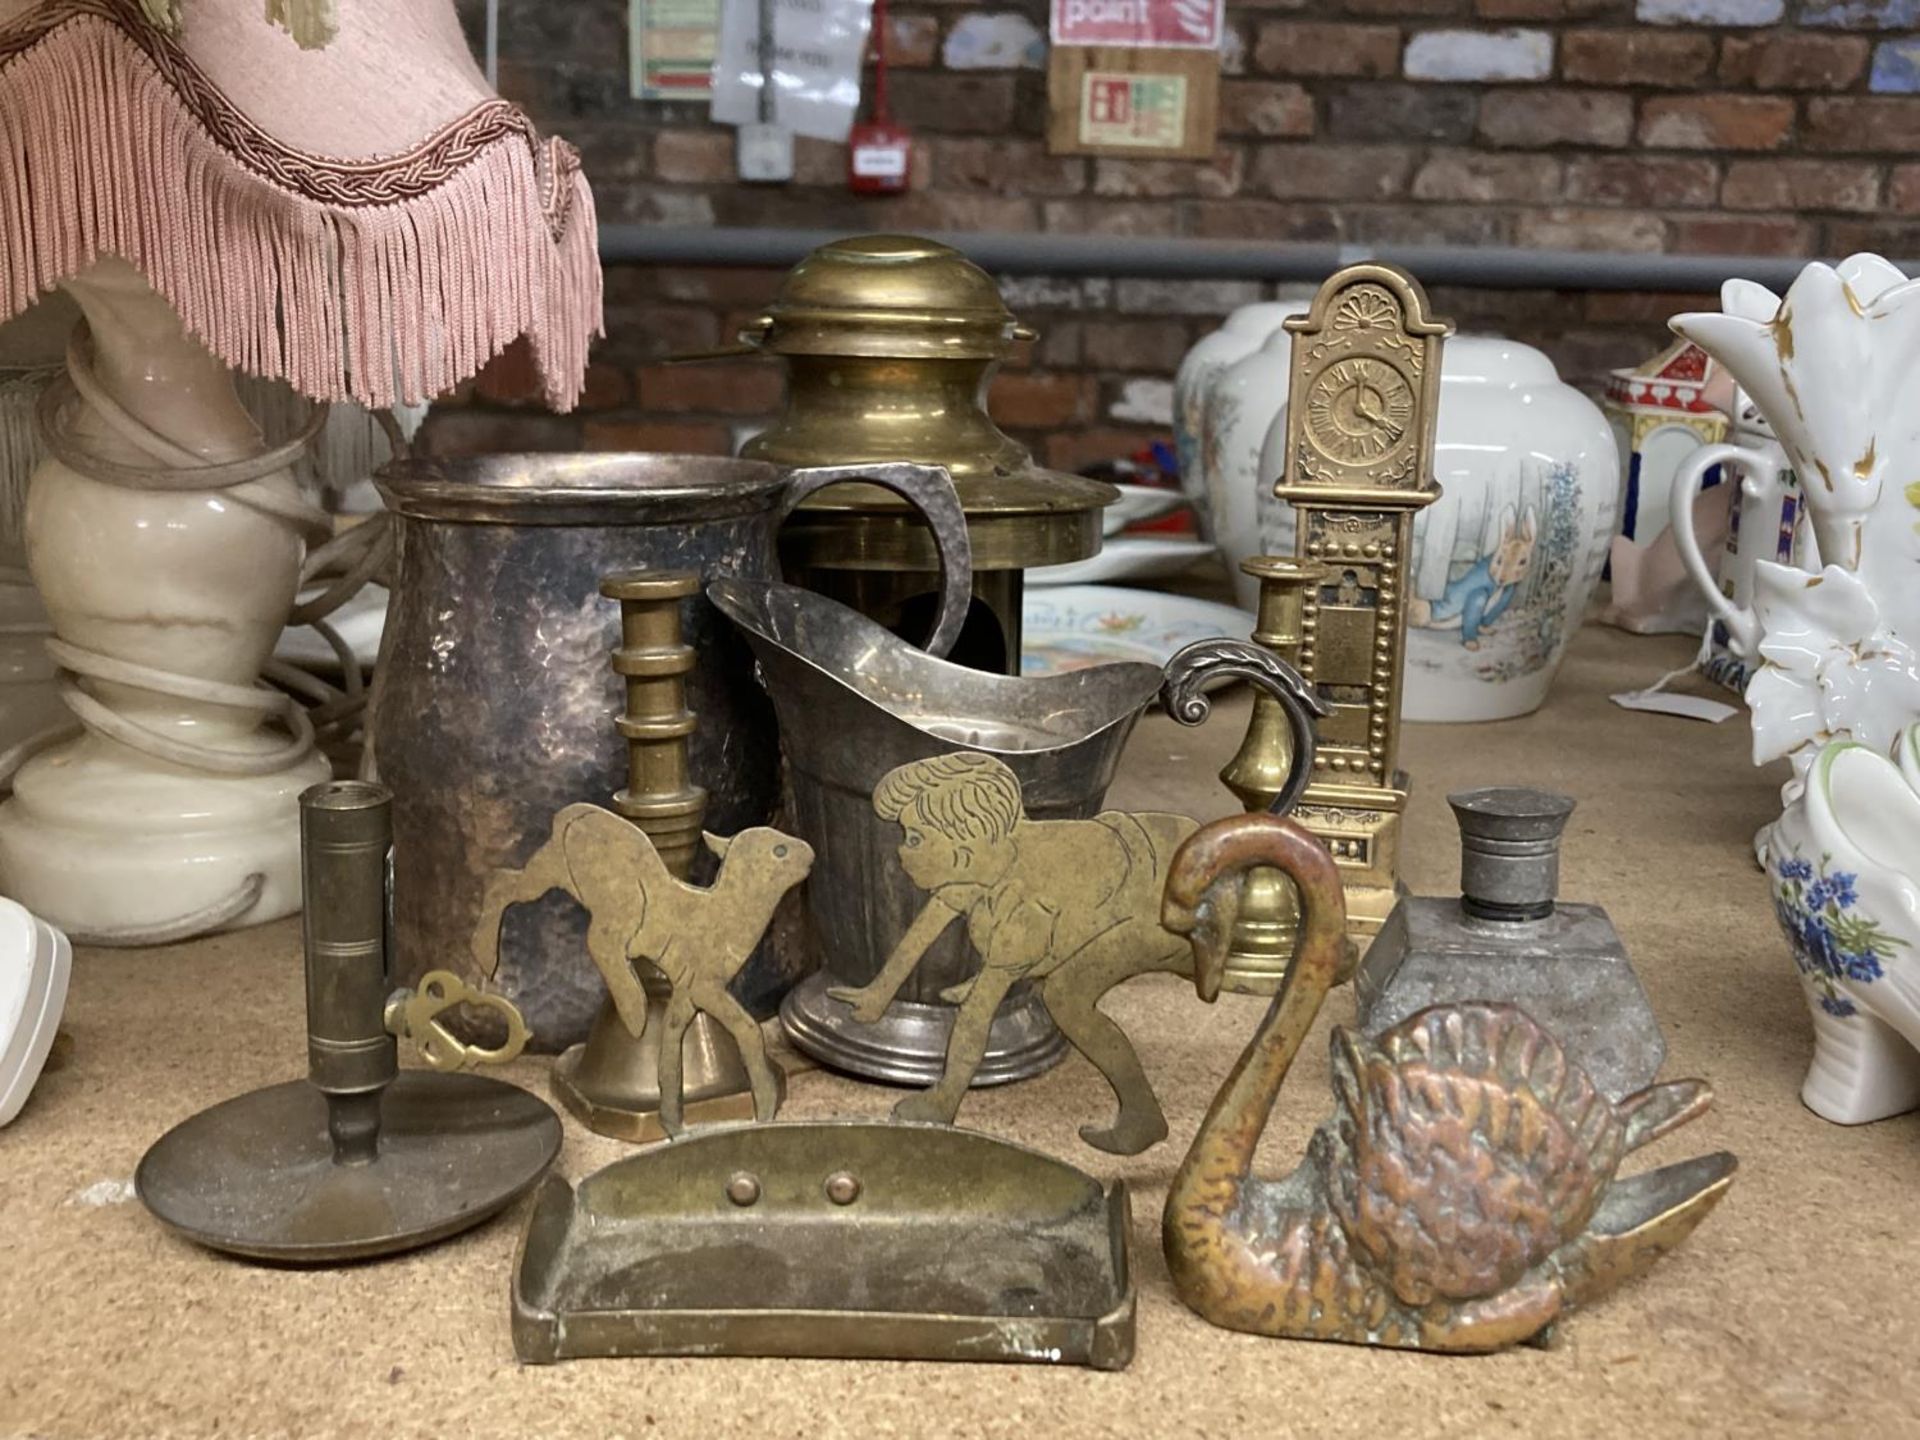 A QUANTITY OF VINTAGE BRASSWARE TO INCLUDE A SMALL TRAY WITH A GIRL AND A LAMB, OIL LAMP,